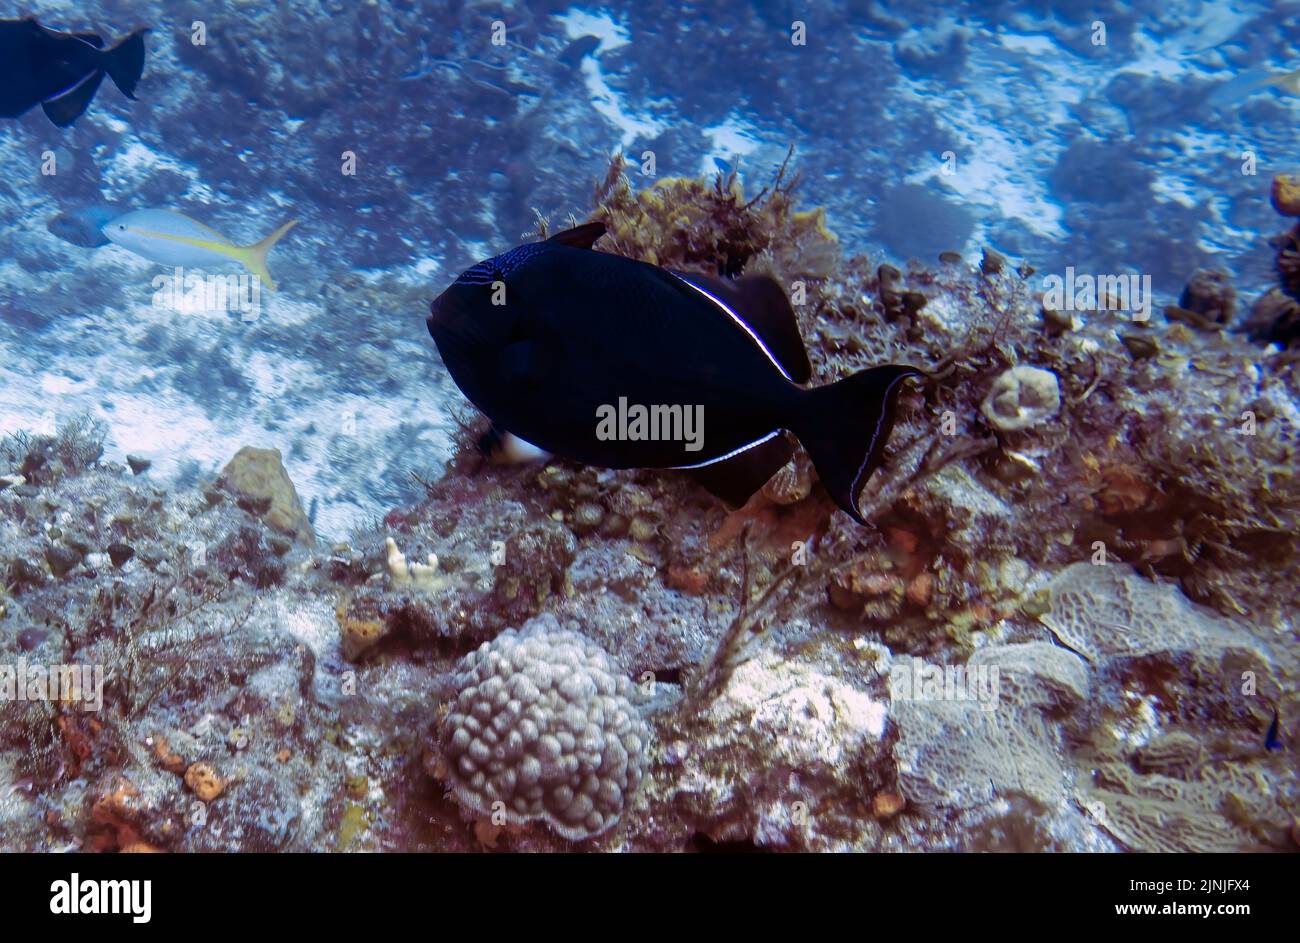 A Black Durgon (Melichthys niger) in Cozumel, Mexico Stock Photo